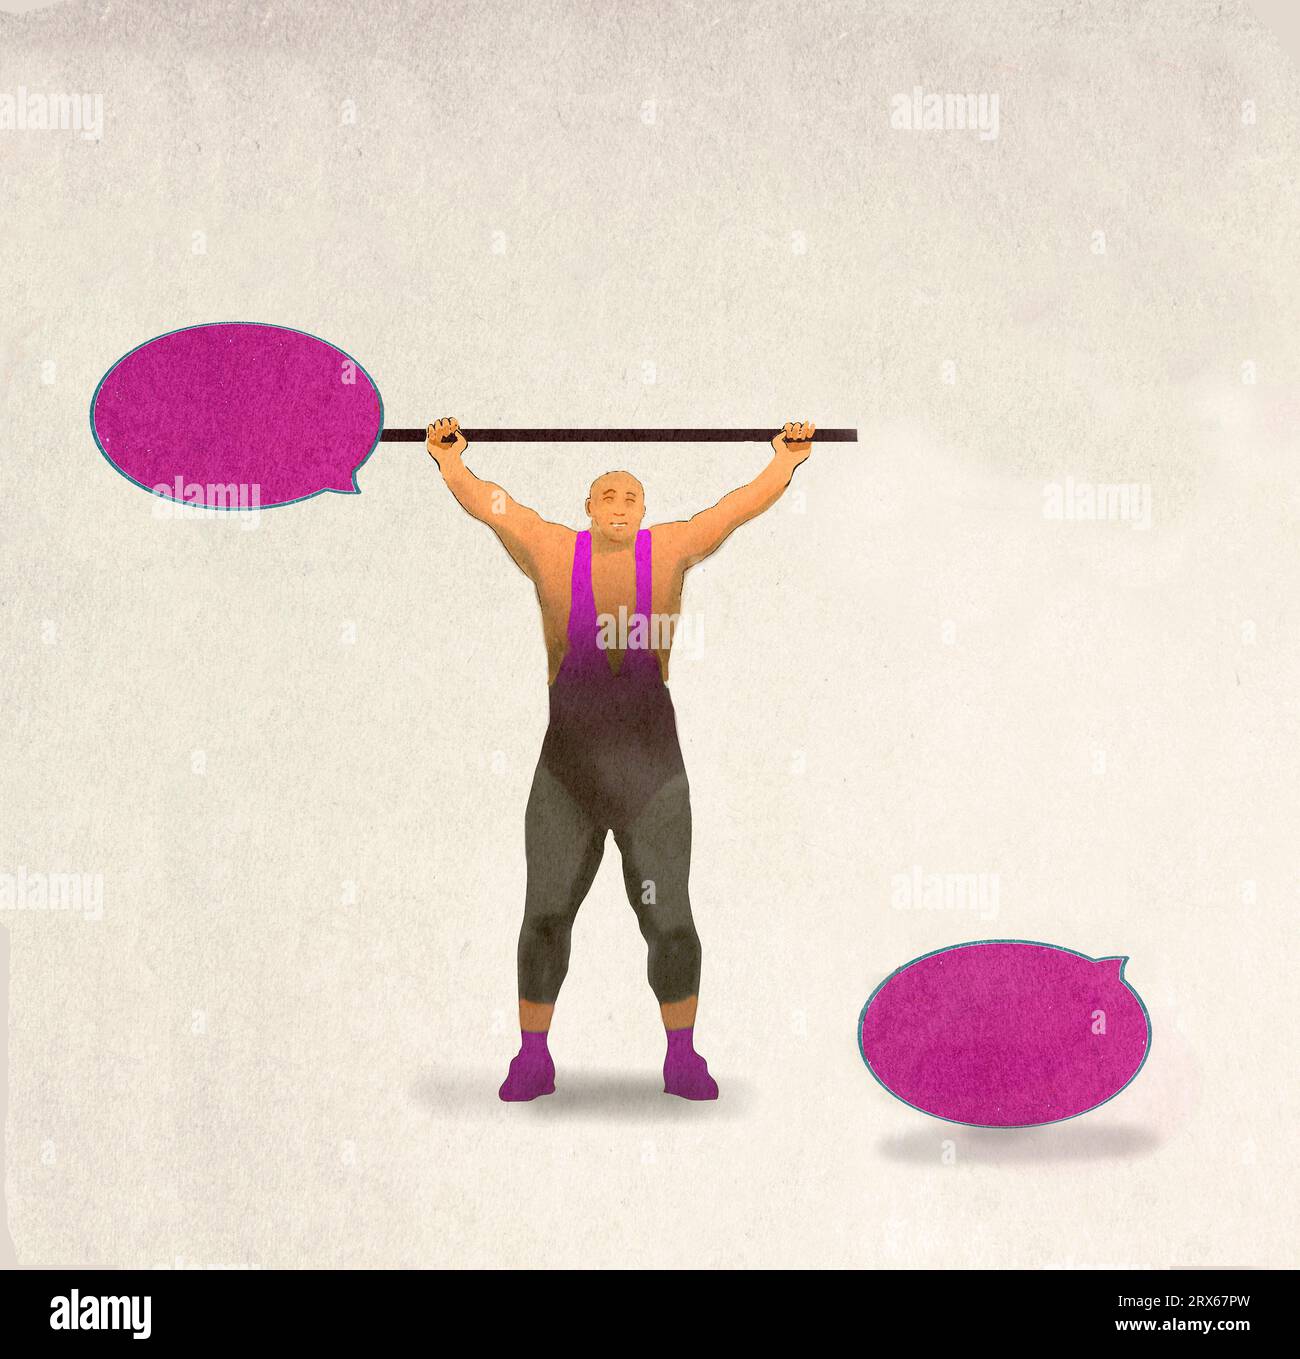 Illustration of strongman lifting barbell made of speech bubbles with one end broken off Stock Photo